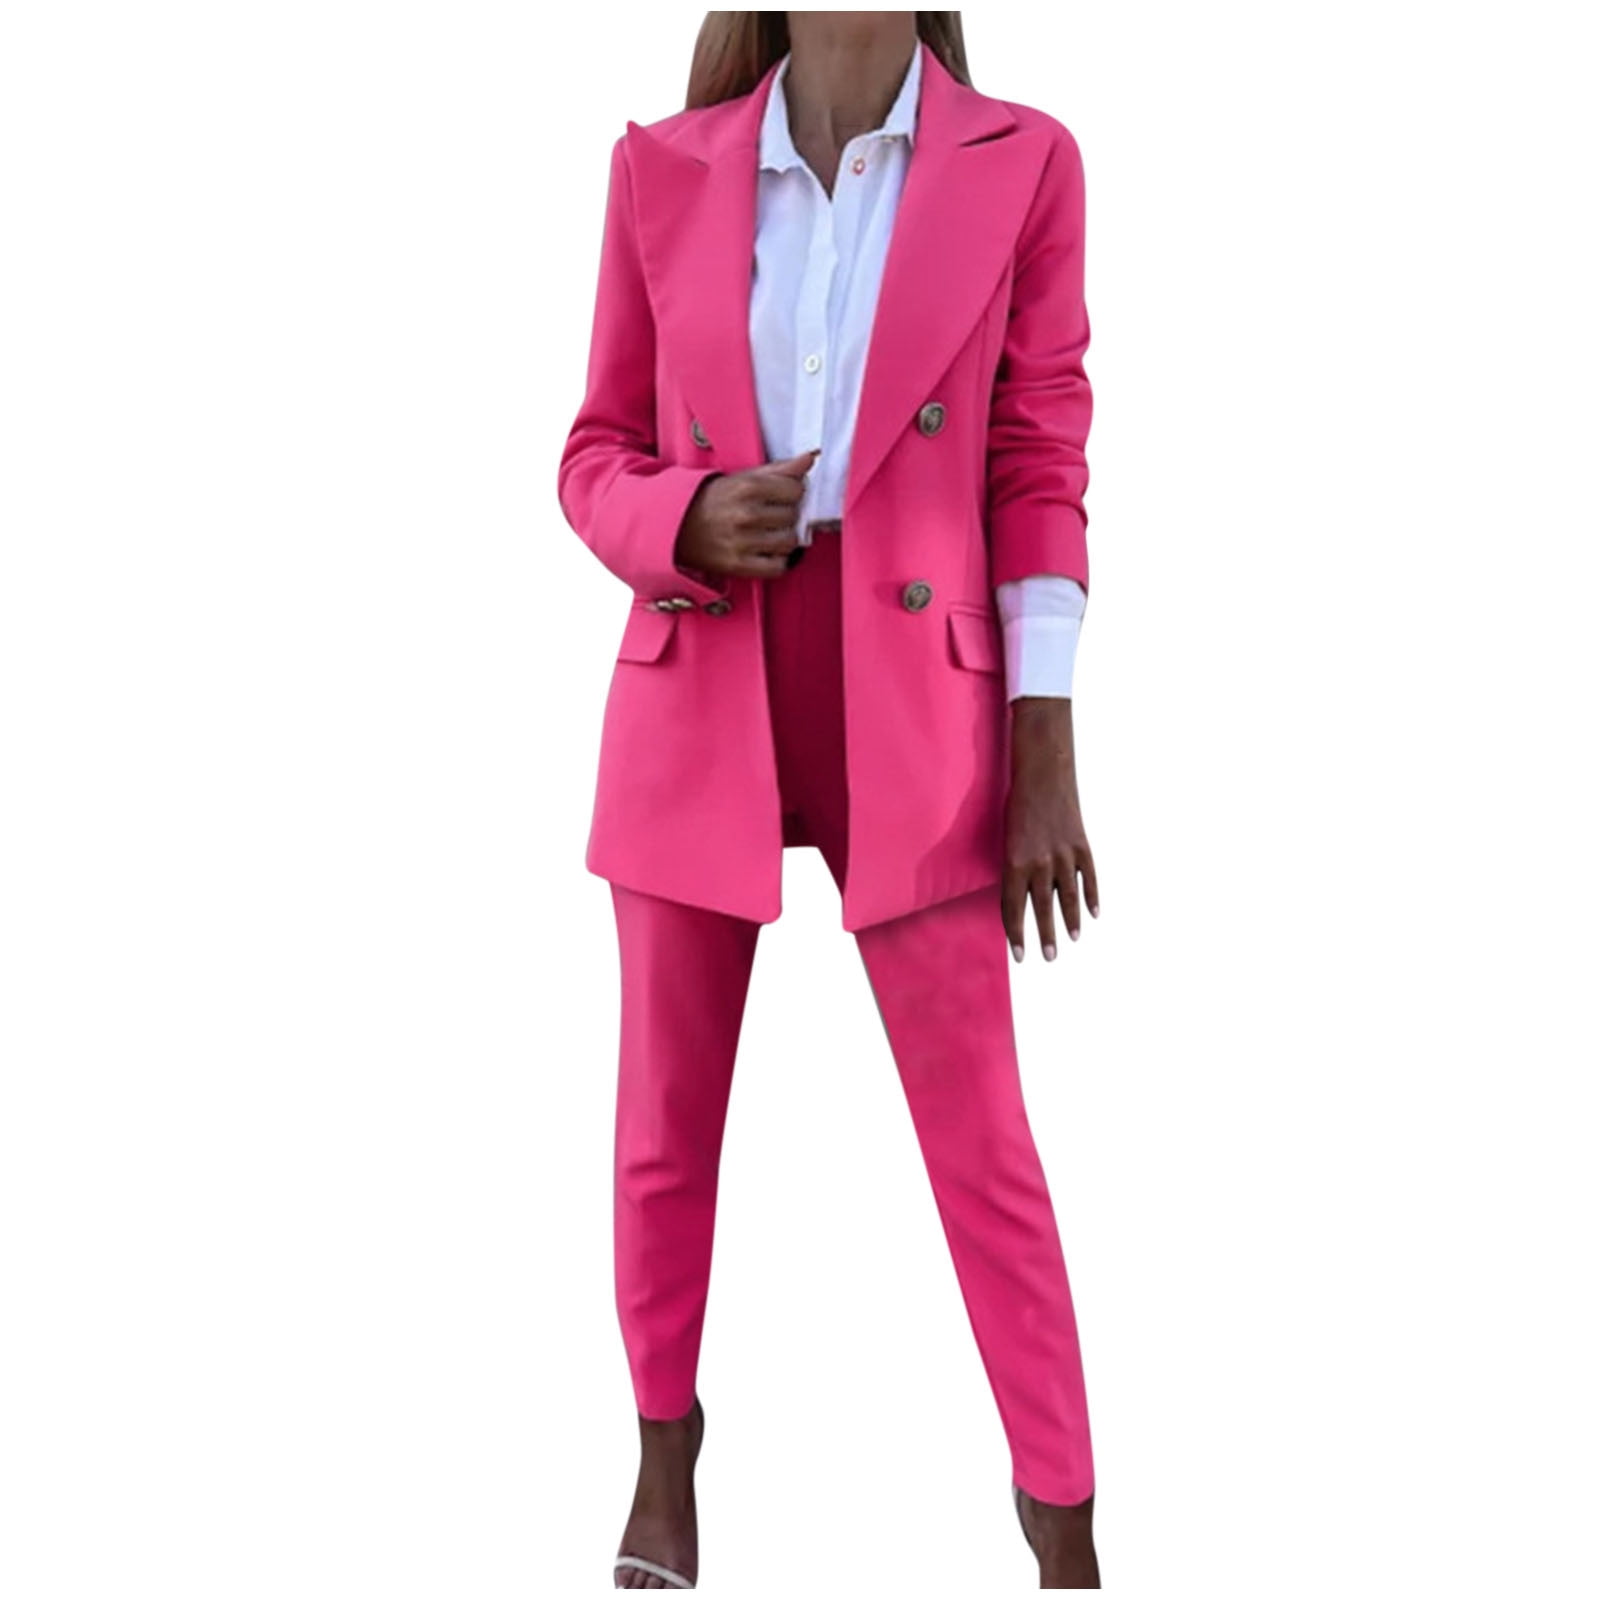 YWDJ 2 Piece Outfits for Women Dressy ’s Fashion Casual Loose Color  BlockingSuit Suit Office Two-piece Suit Pink S